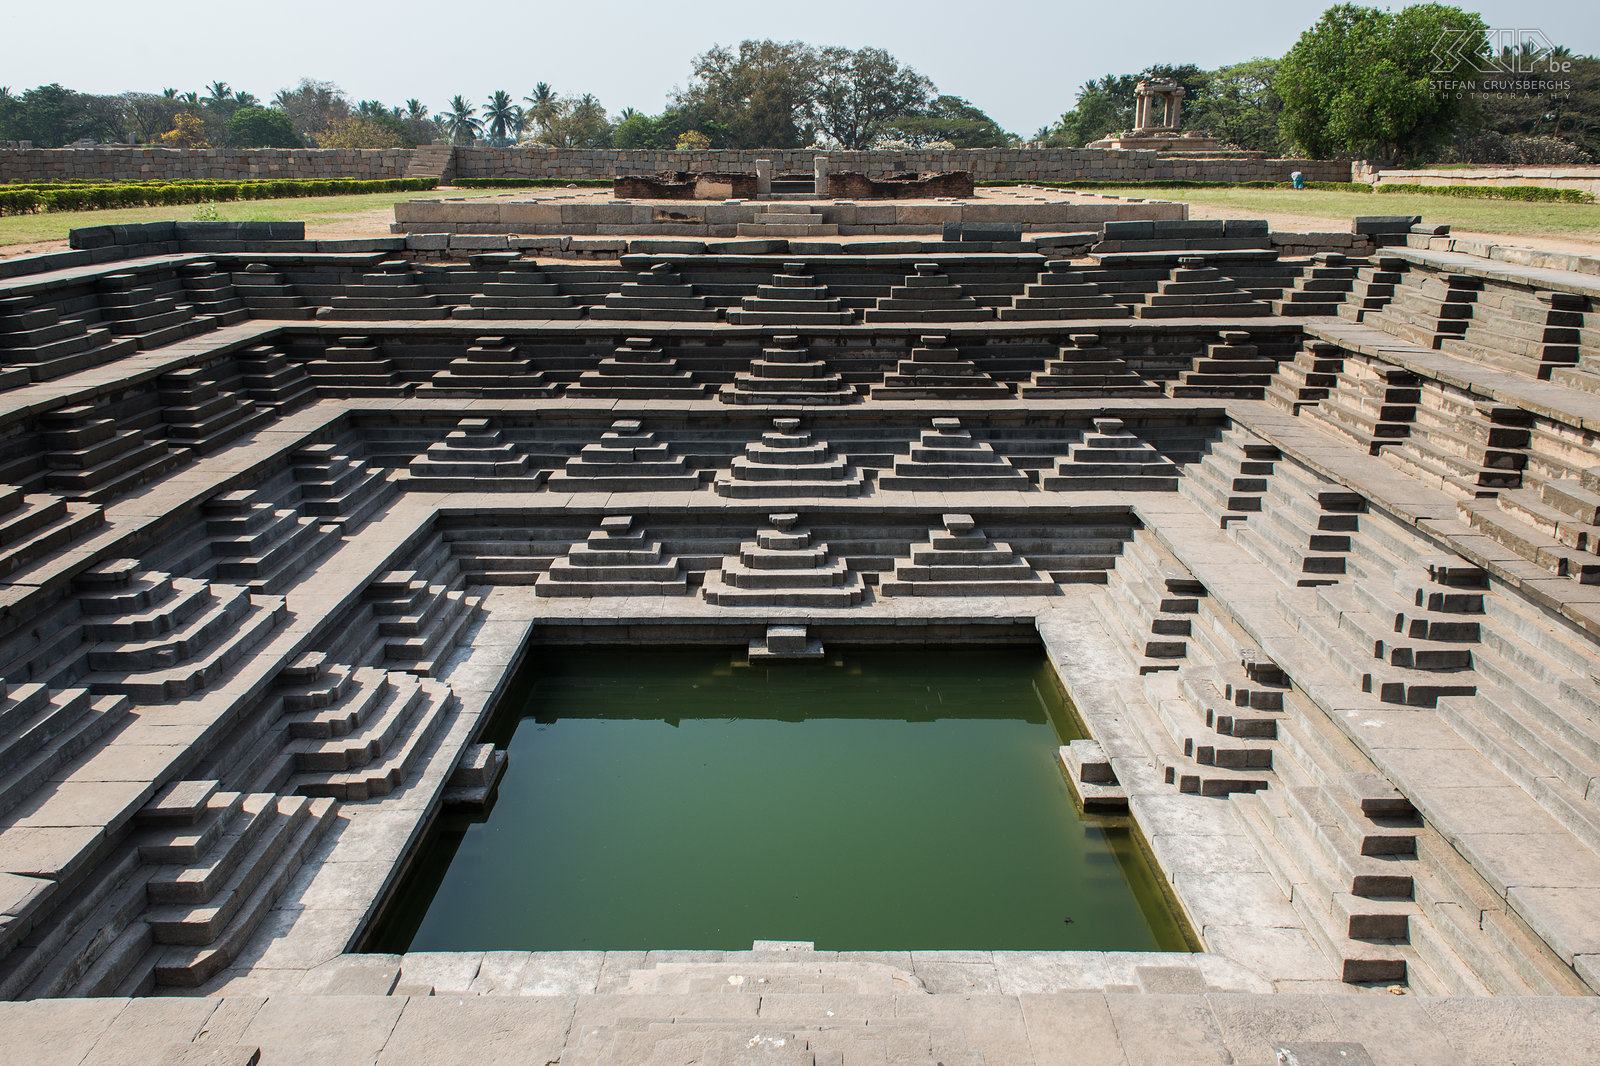 Hampi - Royal enclosre - Stepped tank The royal enclosure still has a beautiful stepped water storage tank which is called pushkarani. Stefan Cruysberghs